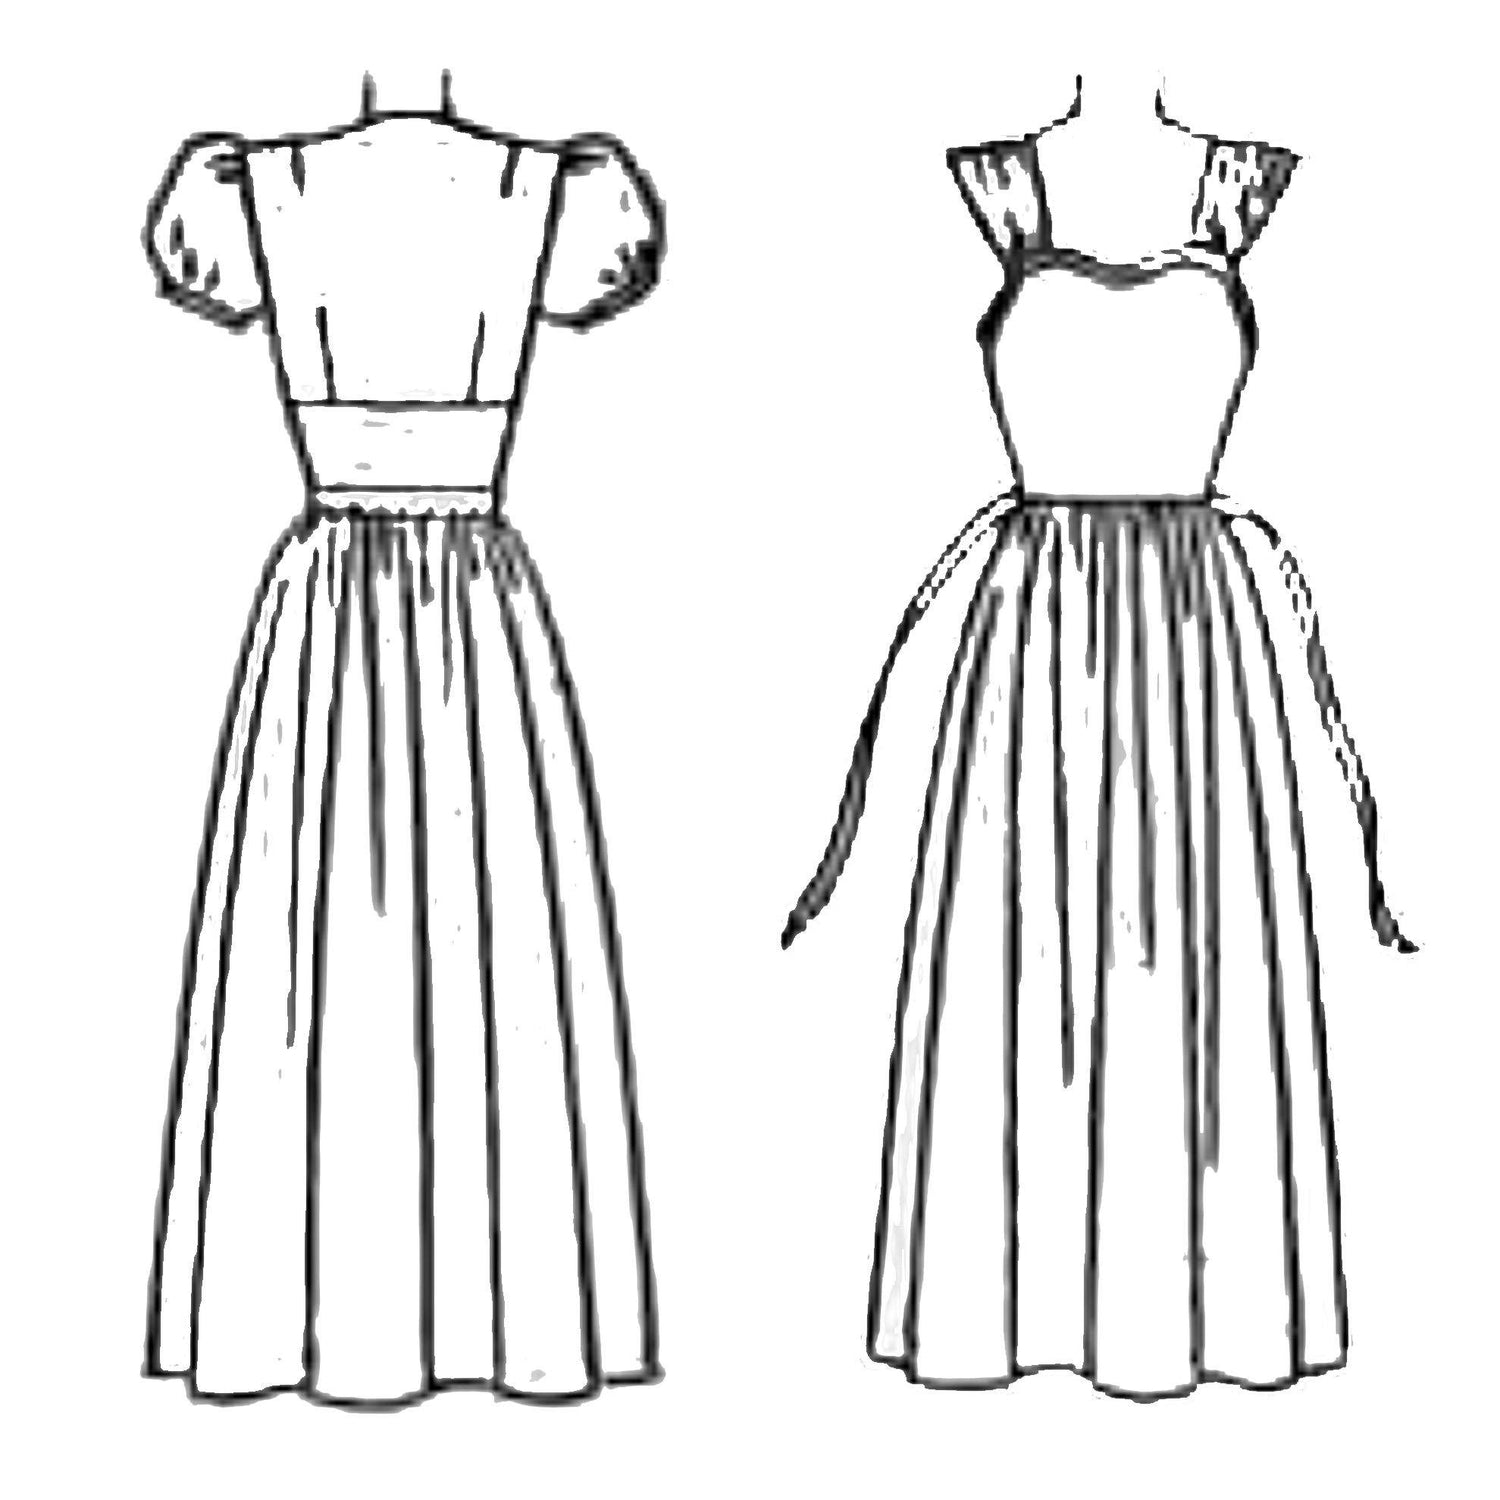 Dress illustrations on the back of a sewing pattern